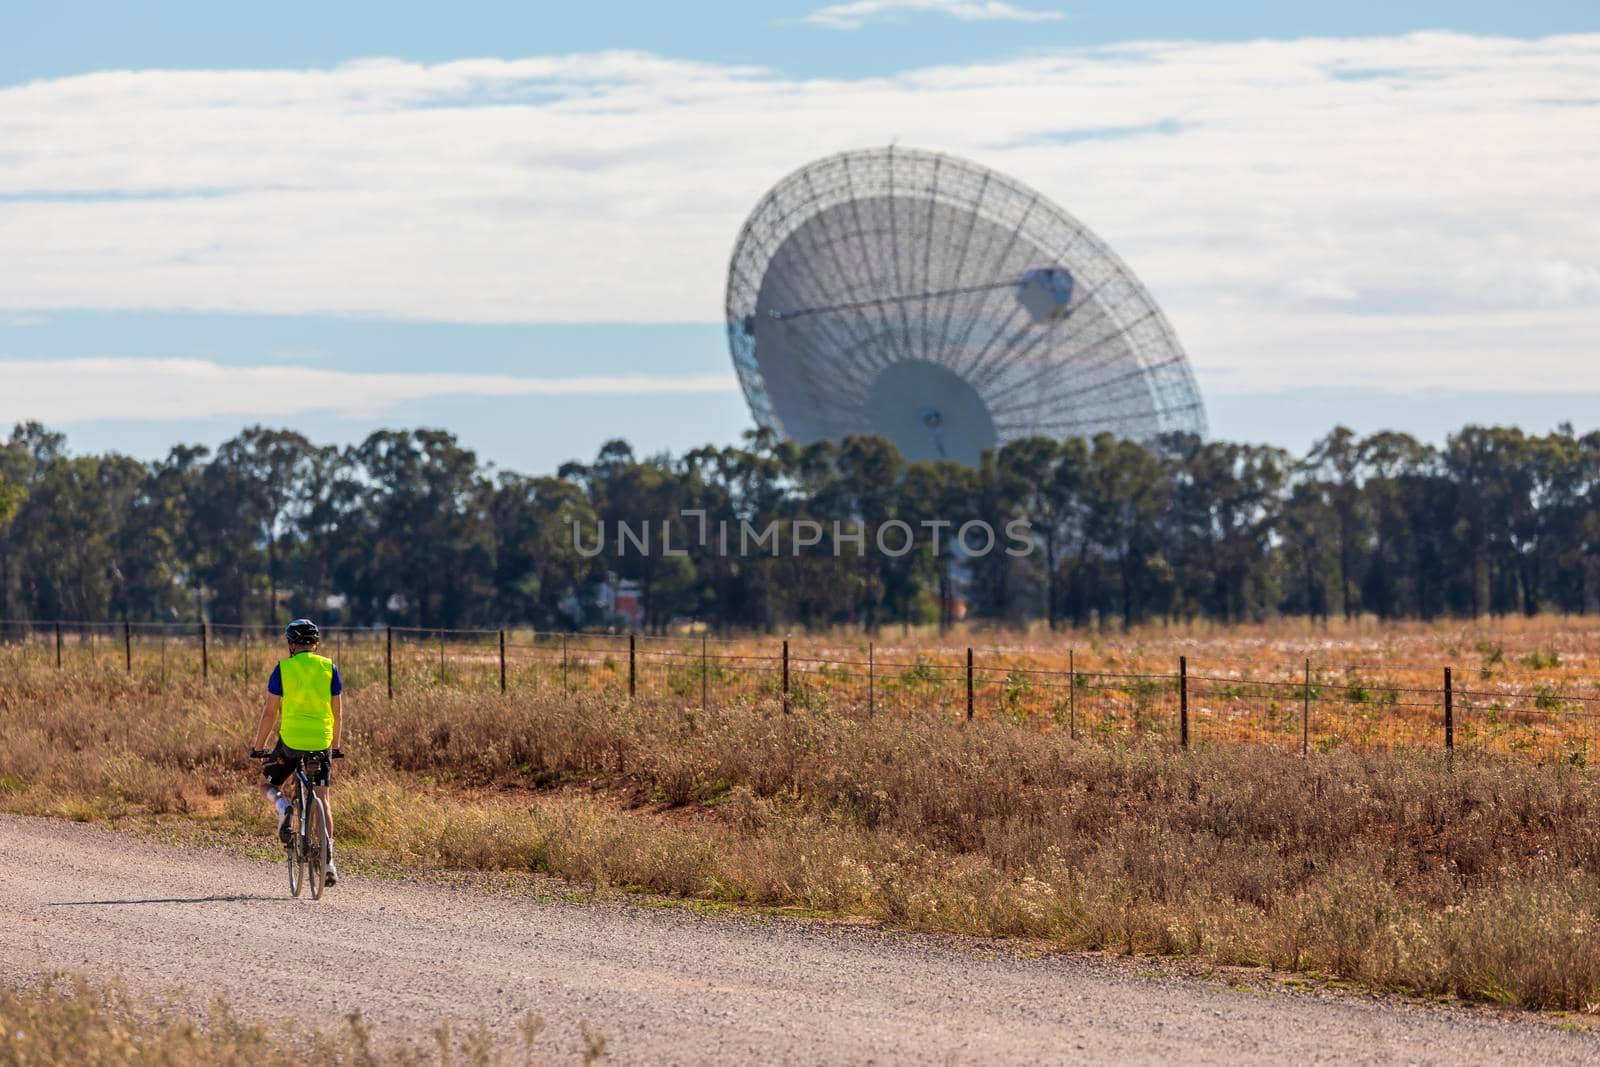 A bicyle rider approaching a large outdoor scientific radio telescope by WittkePhotos